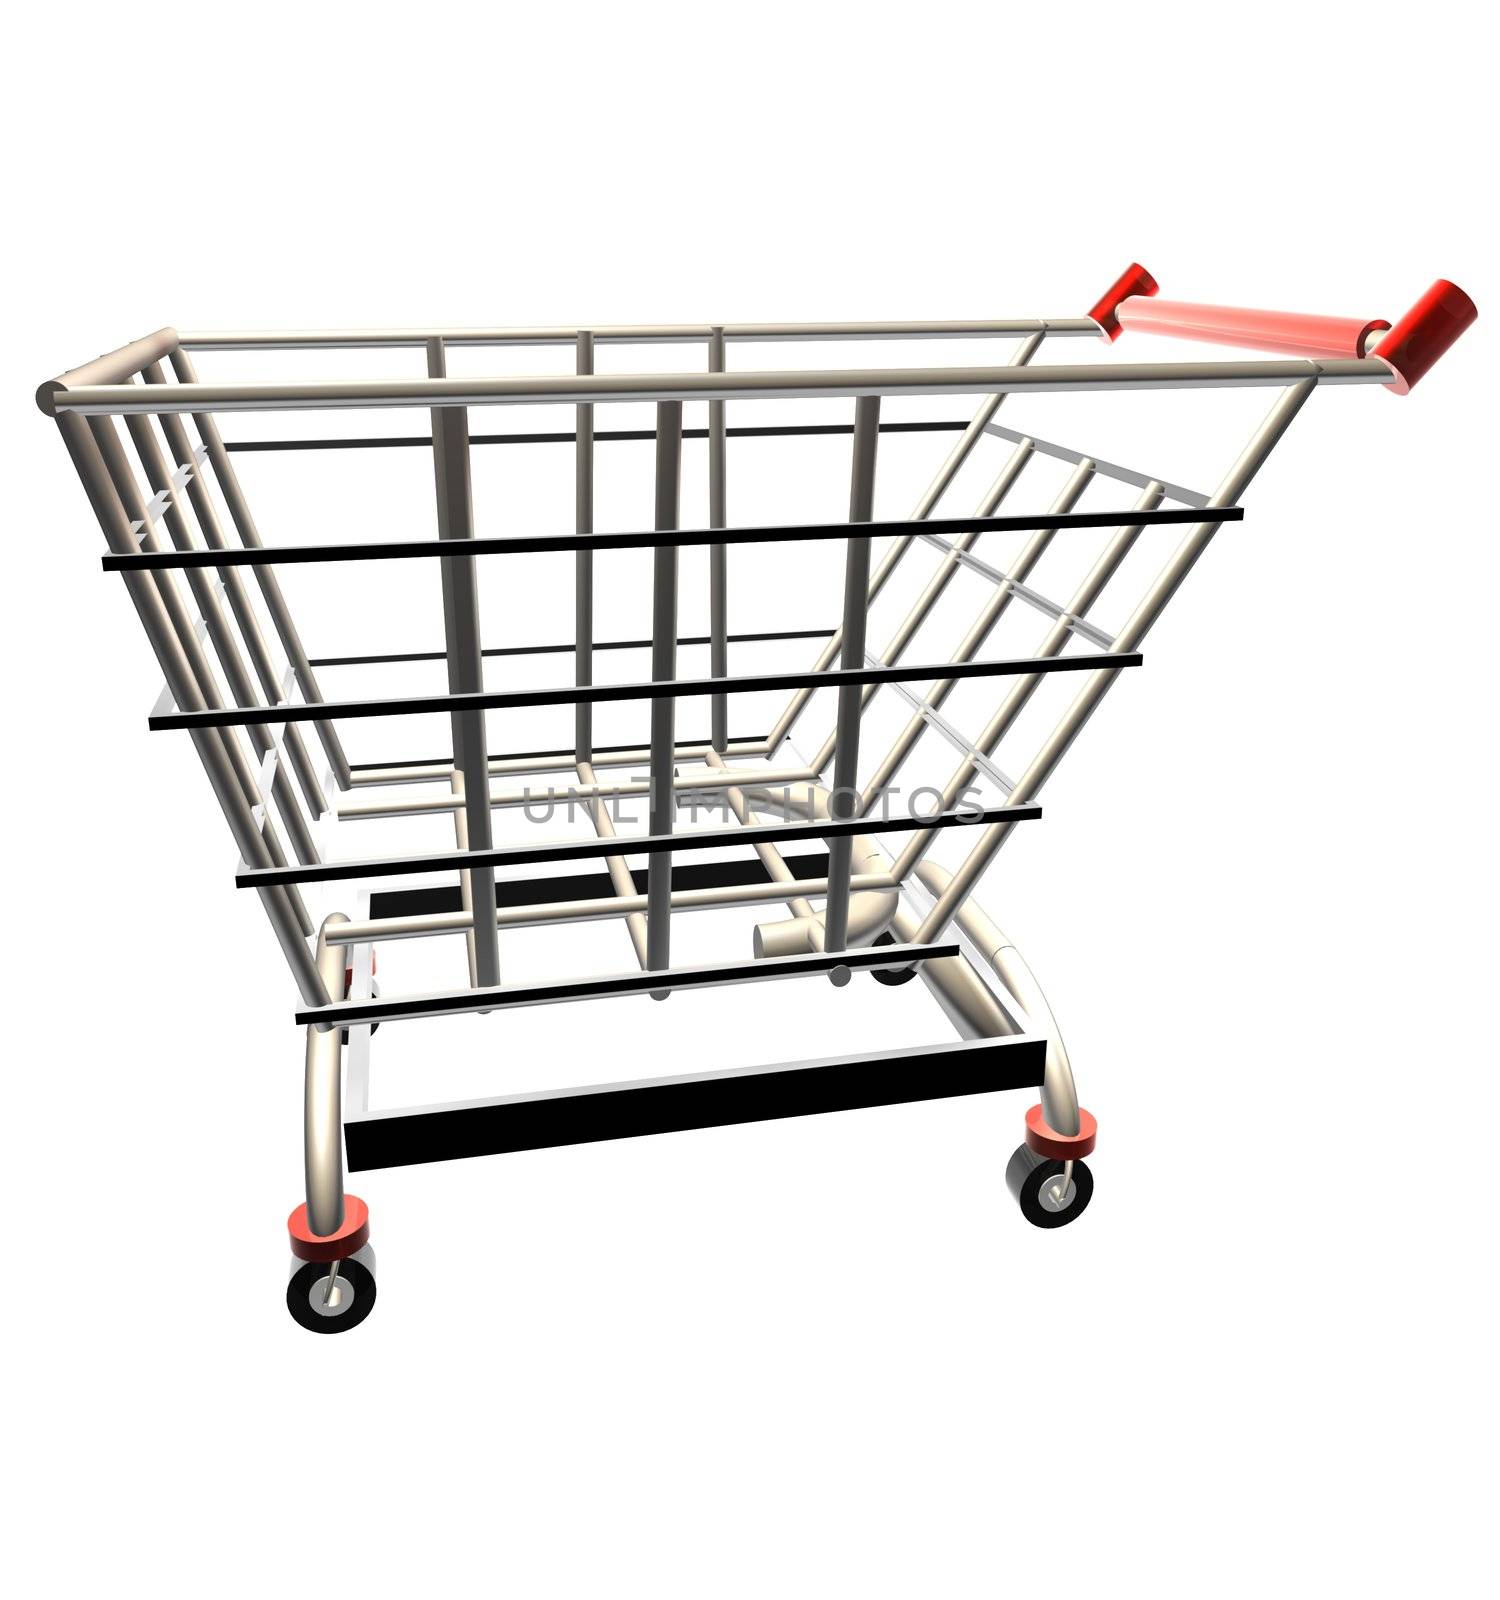 3D render of a shopping cart over white background